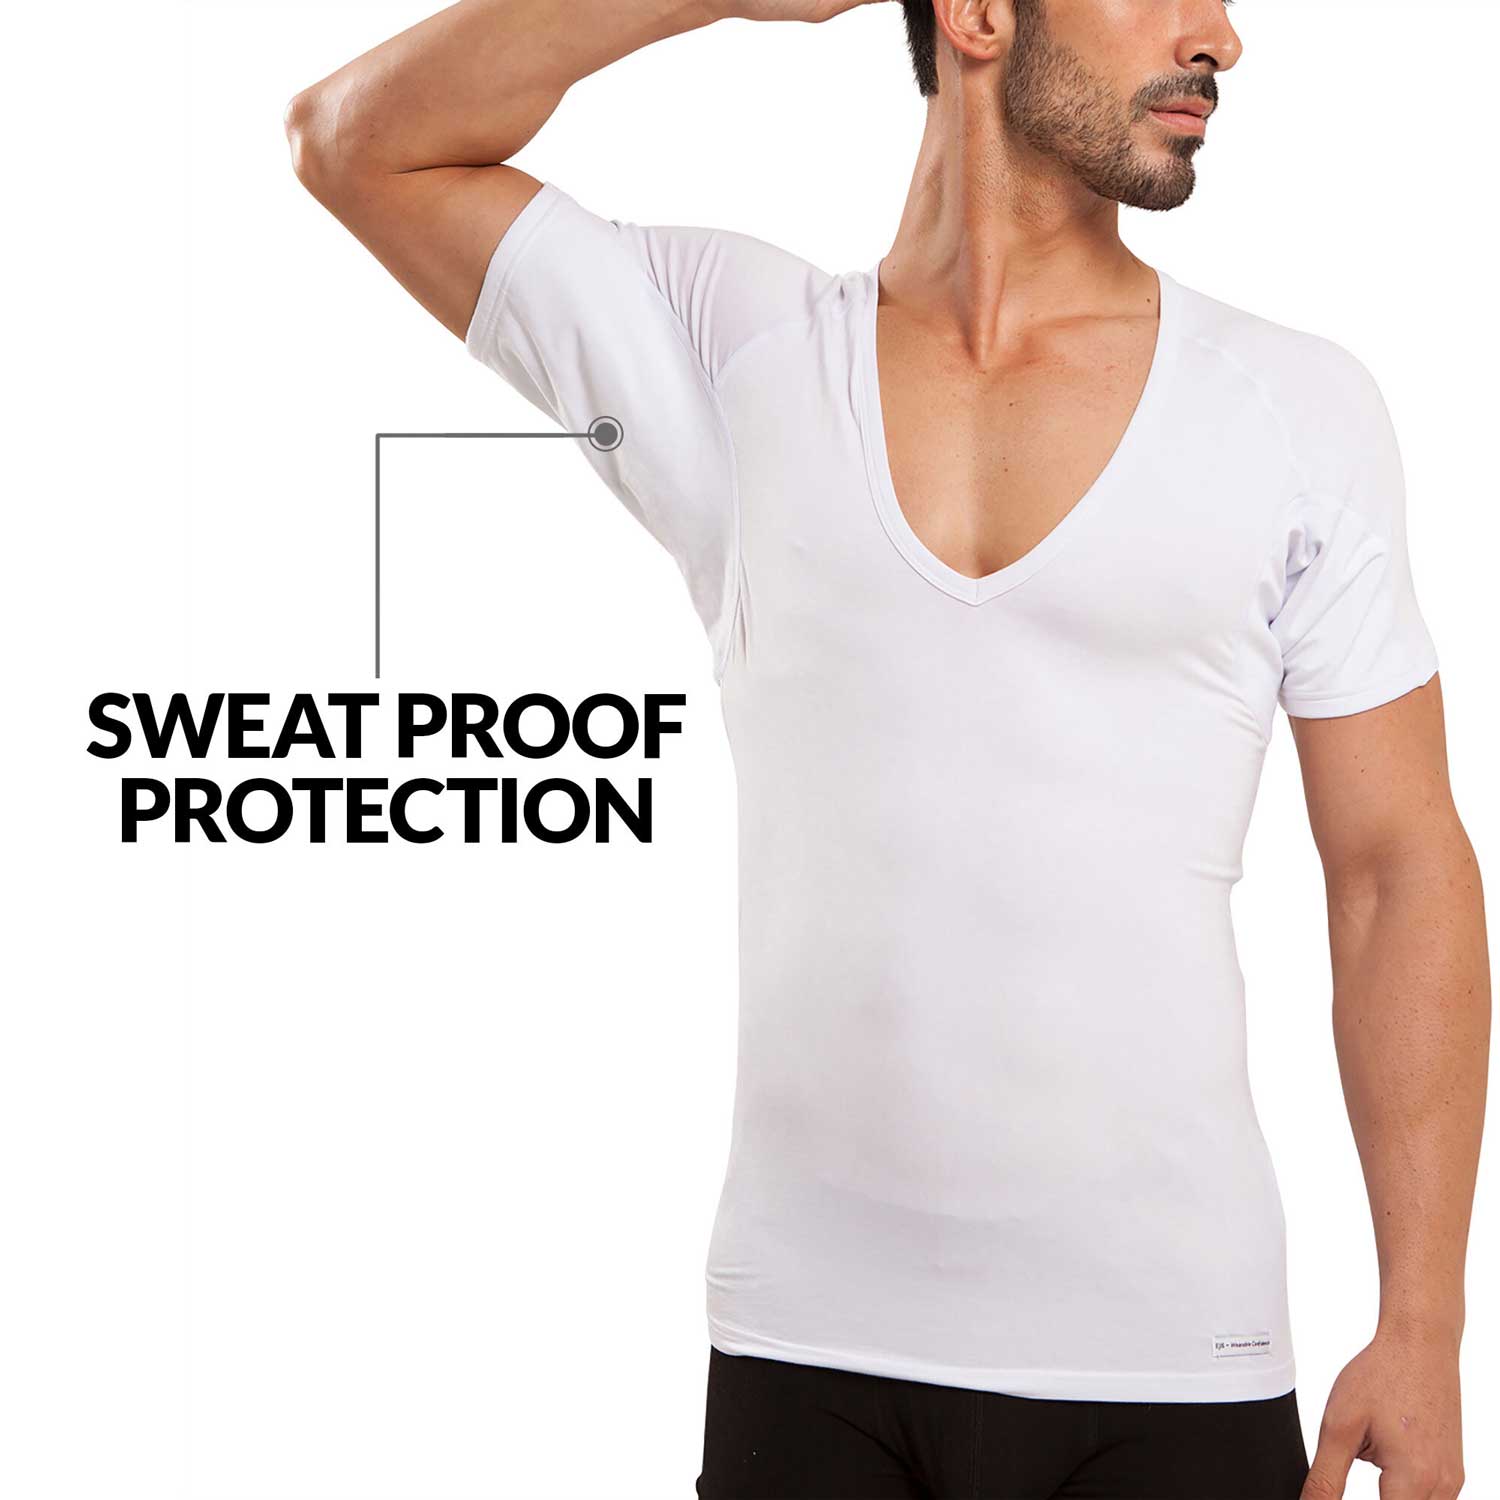 V-Neck Micro Modal Sweat Proof Undershirt For Men with Integrated